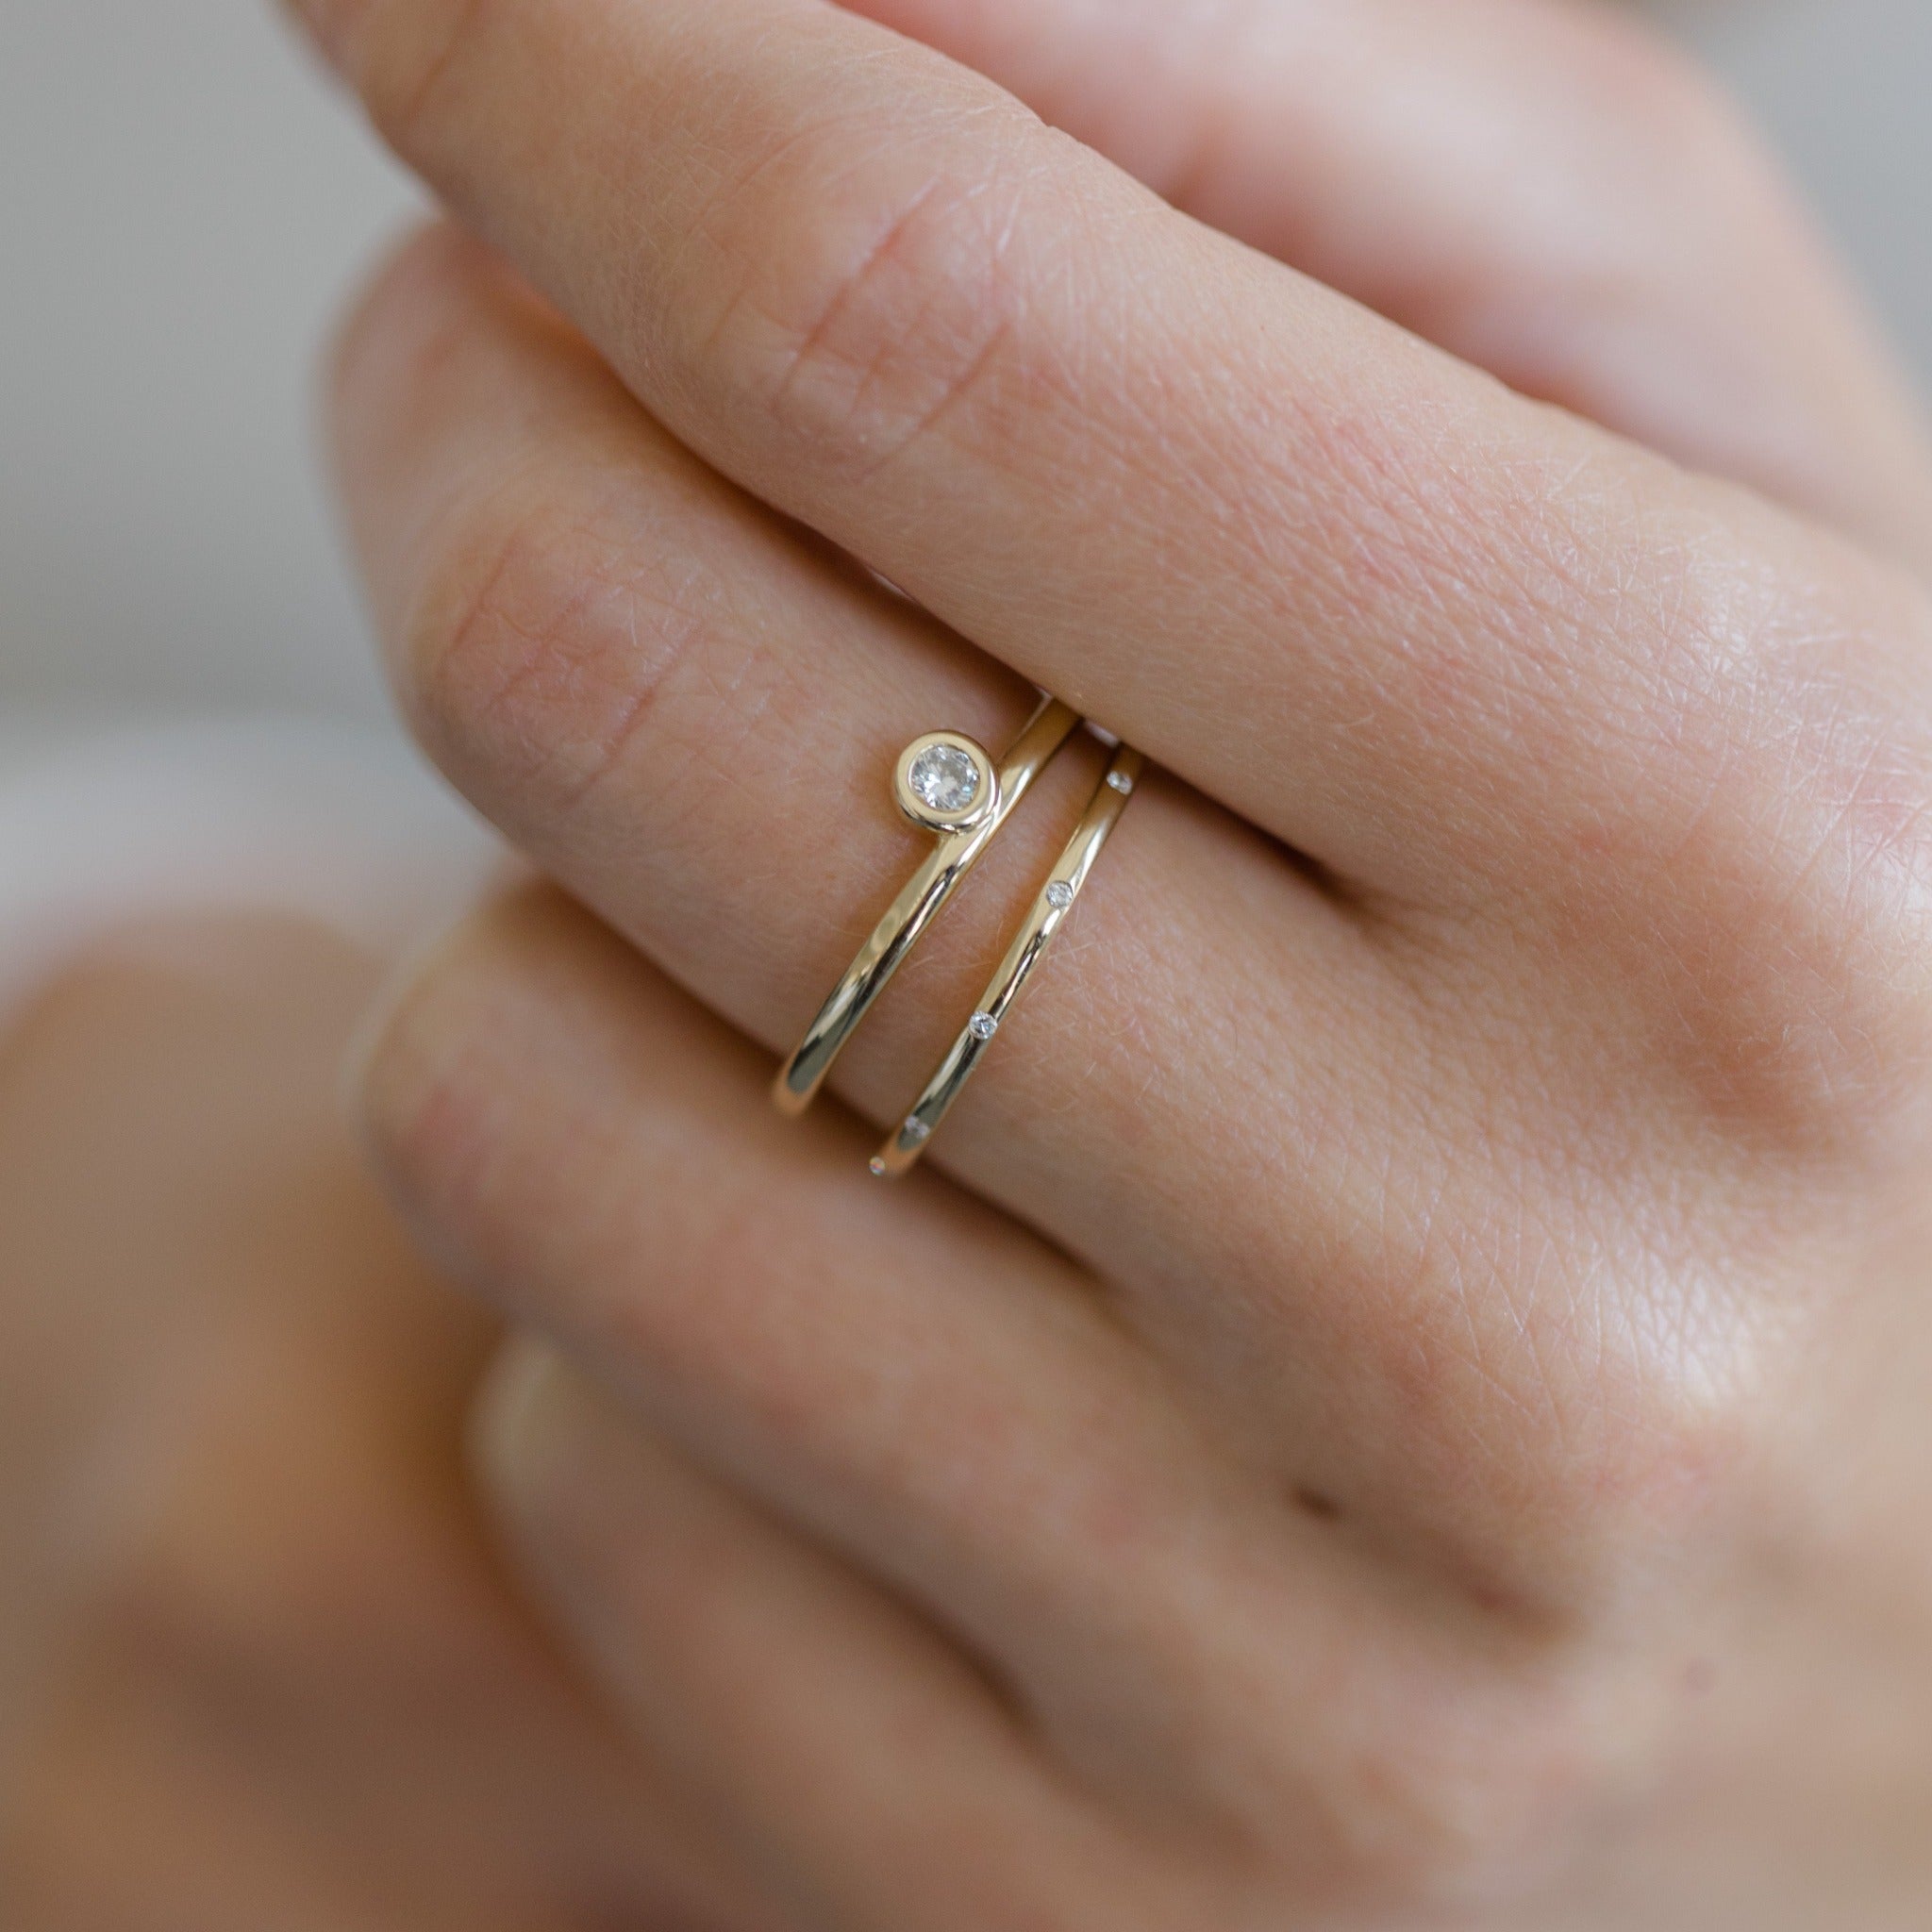 Stack you eternity band with other diamond rings. This sleek little eternity band is delicate, thin but very eye catching. It's elegant for everyday.